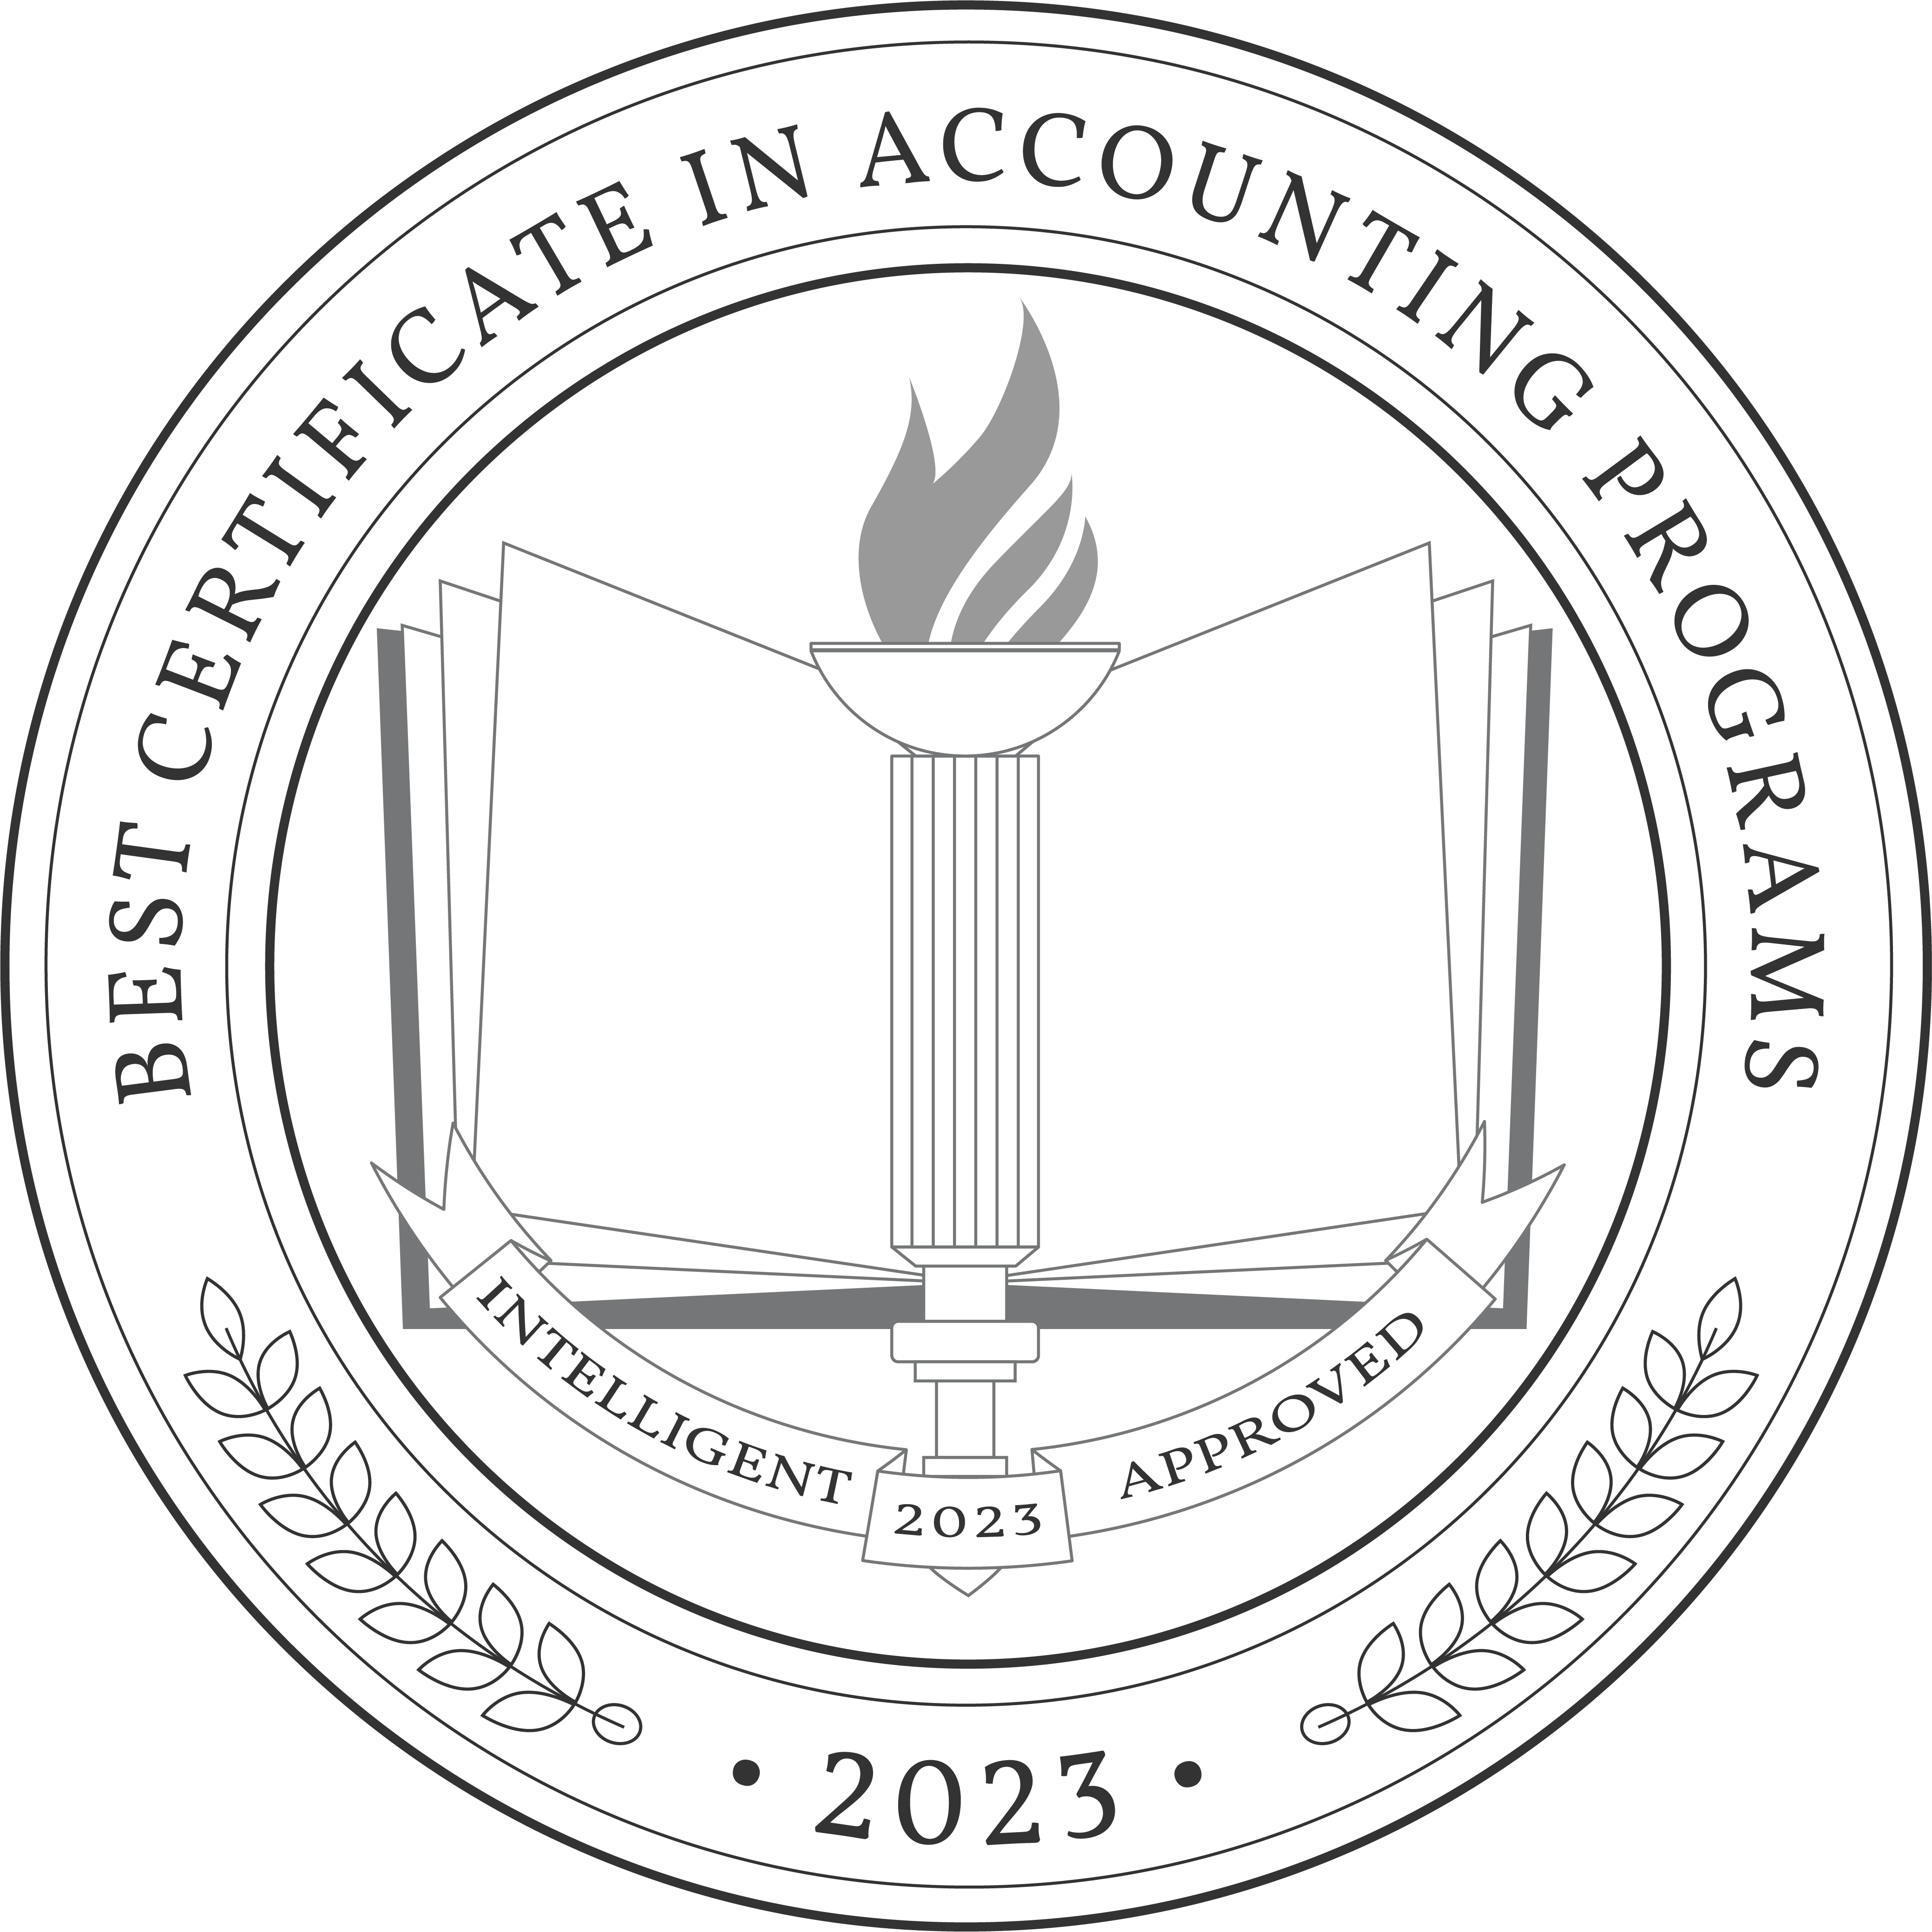 Best Certificate in Accounting Programs 2023